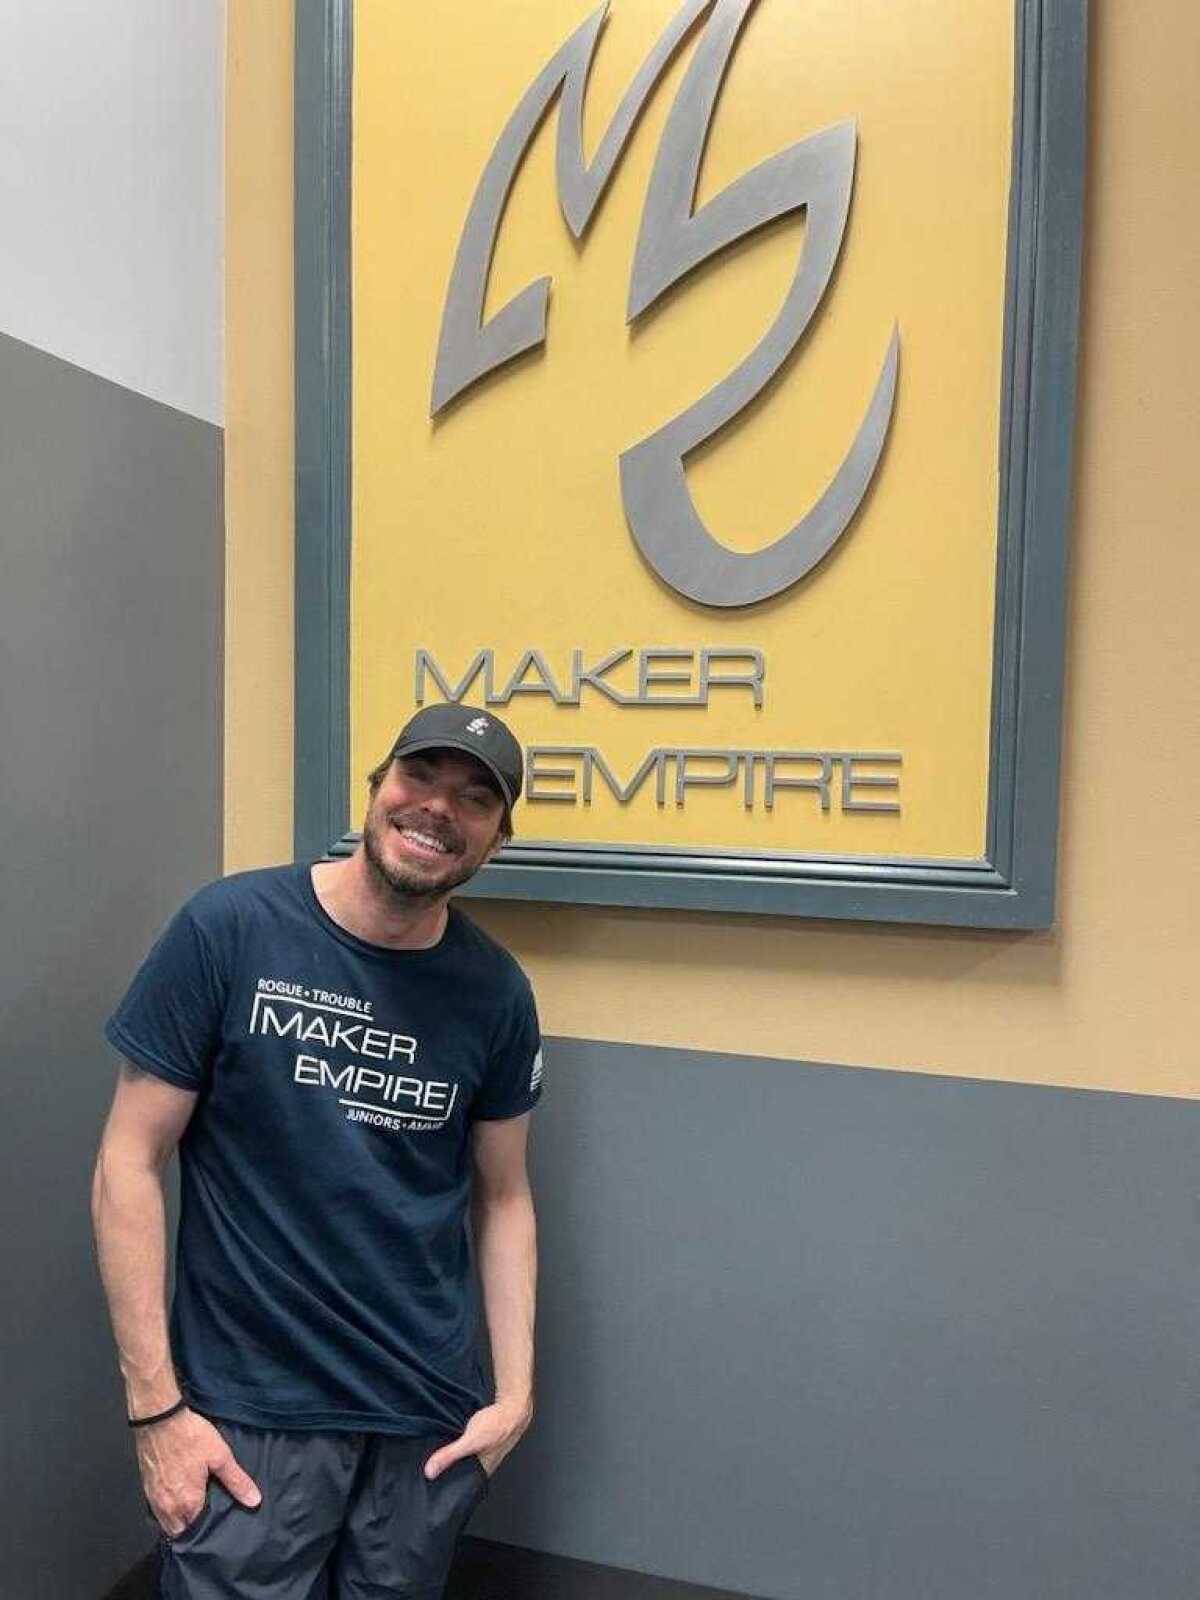 A man in a baseball cap smiles in front of a sign that reads "Maker Empire."